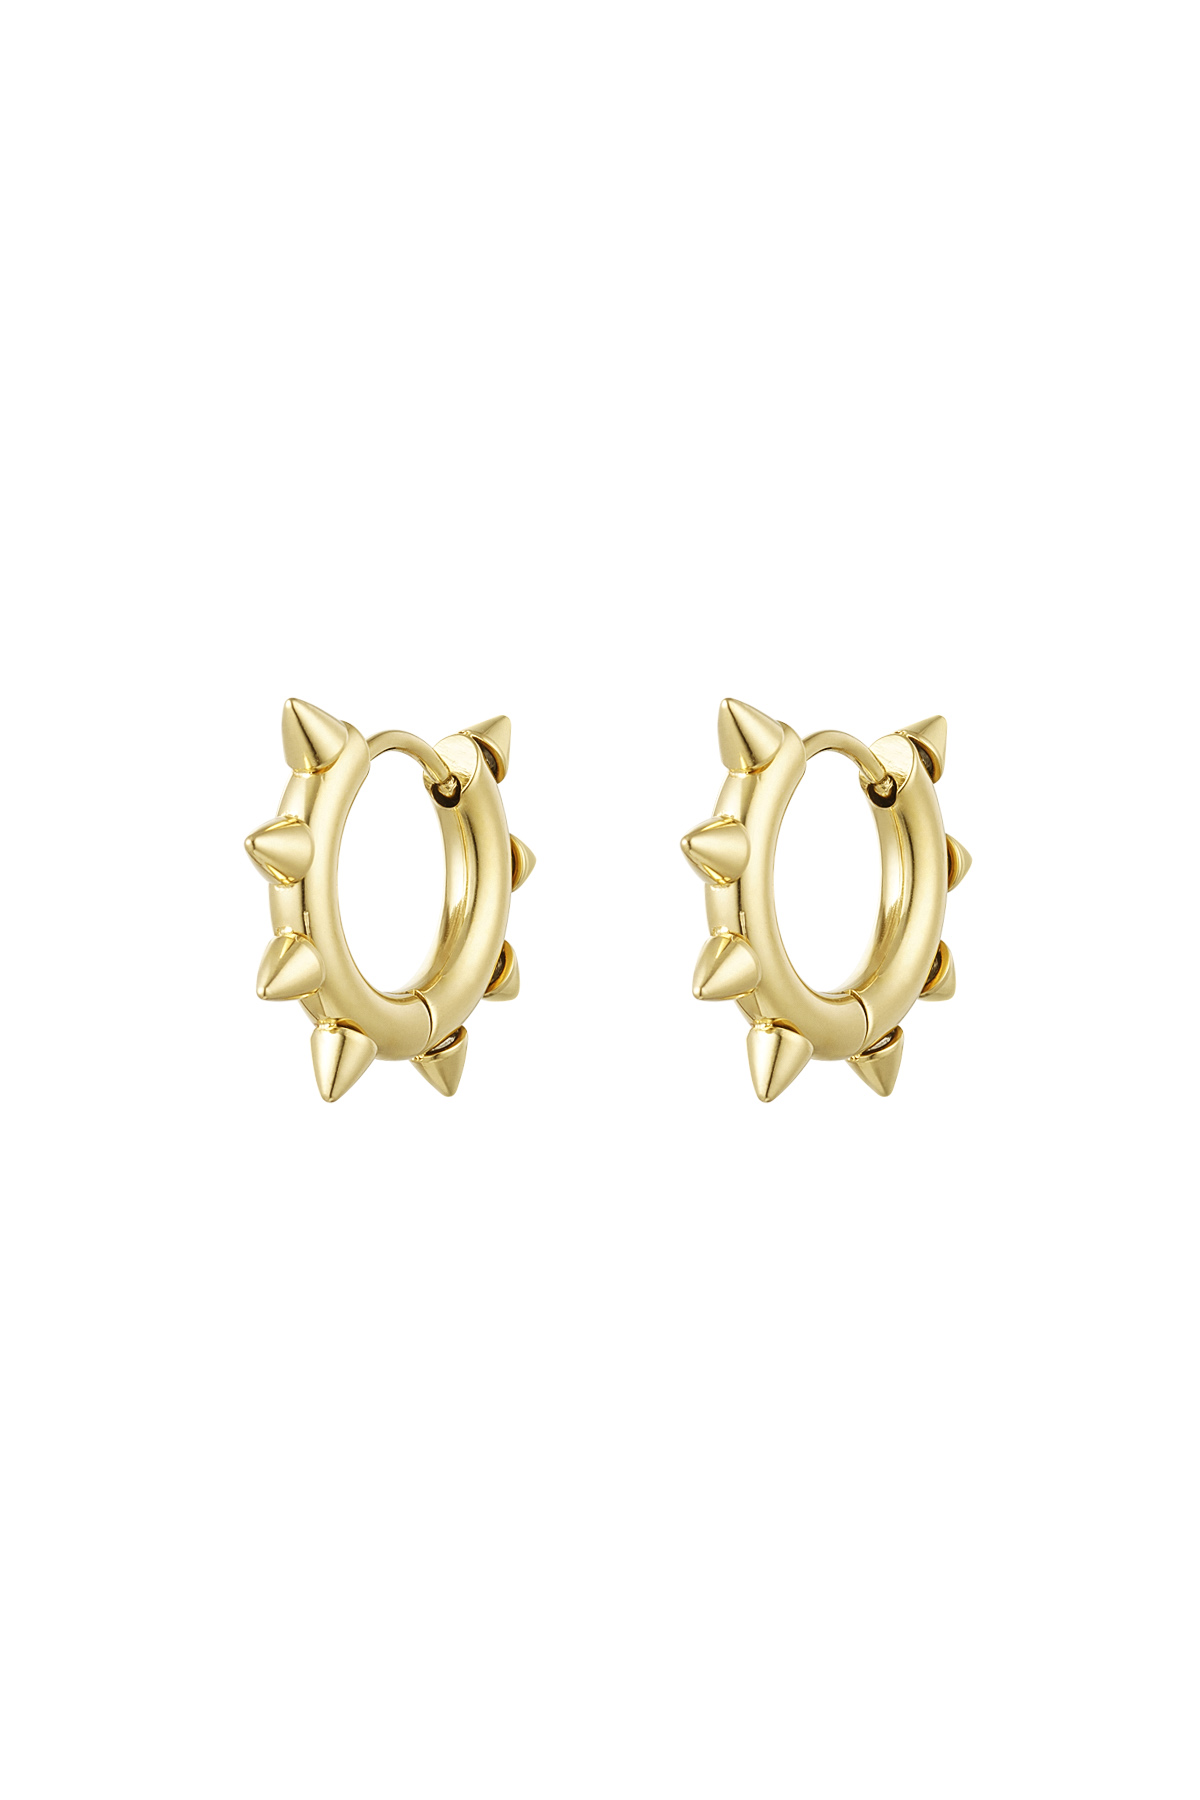 Earrings round spikes small - gold Stainless Steel 